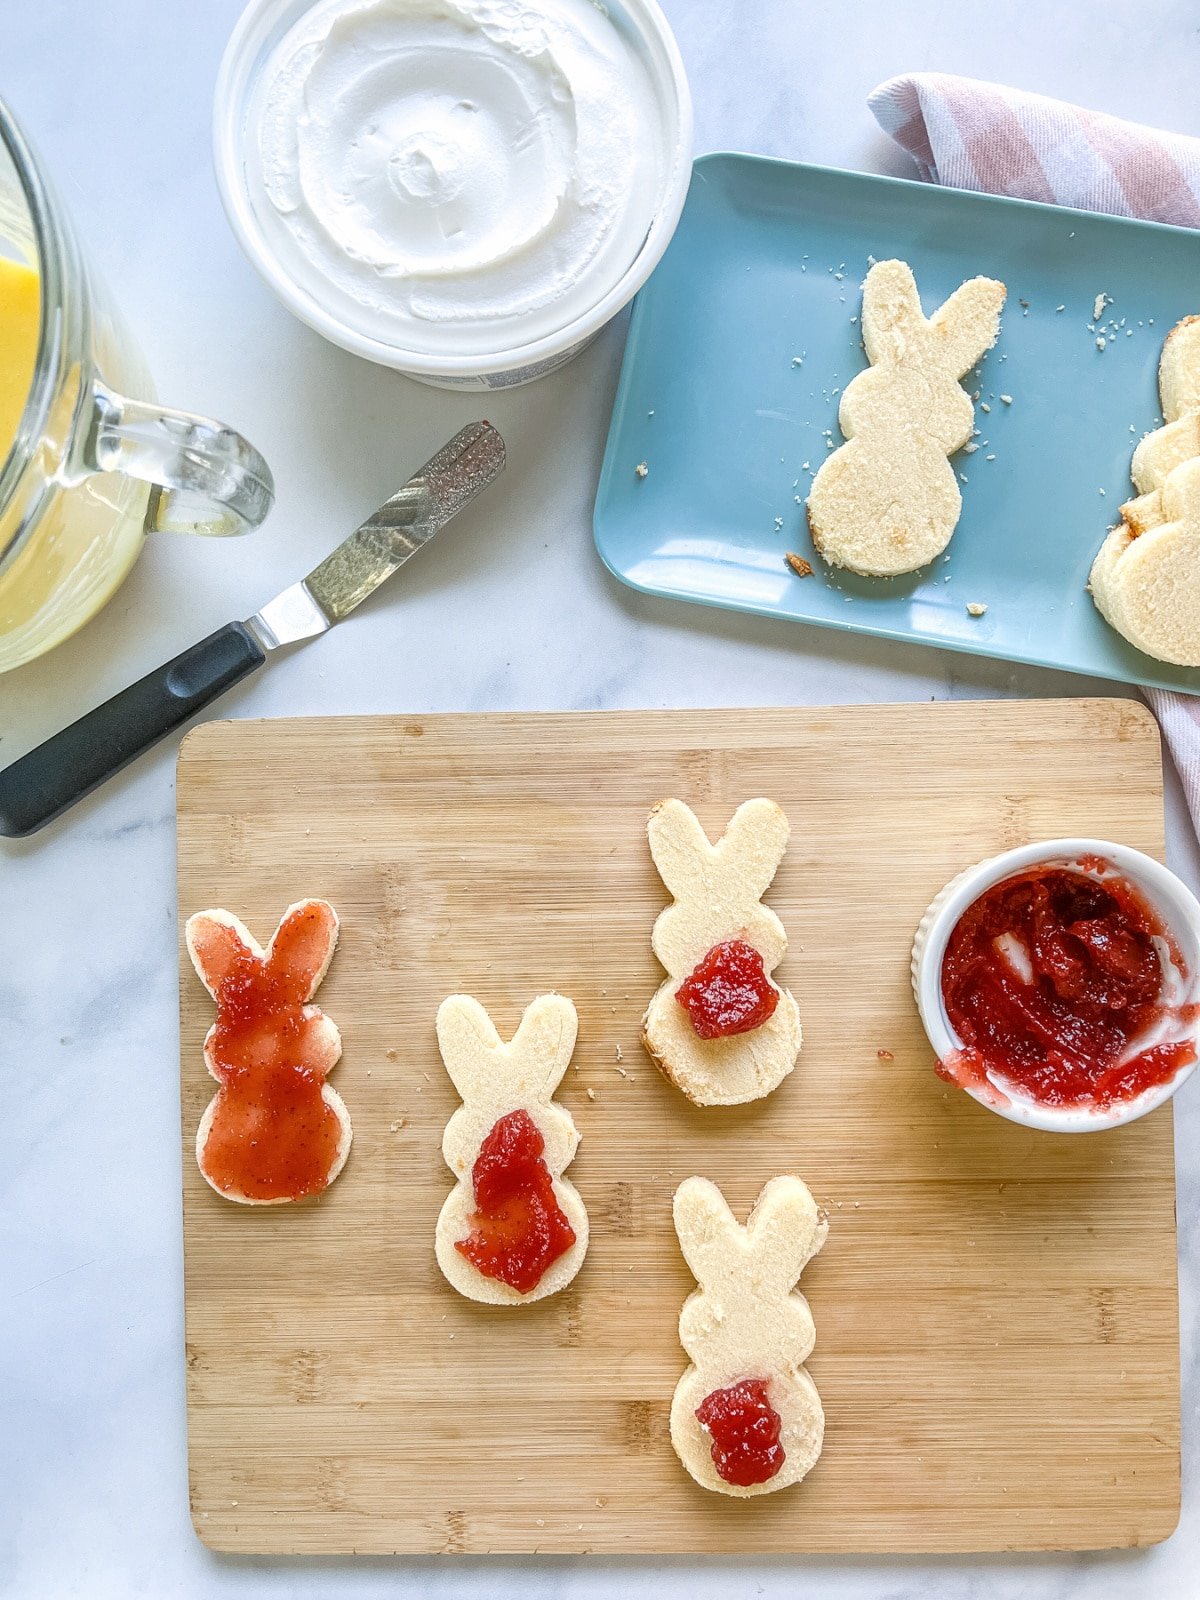 take 4 bunny slices and spread with jelly